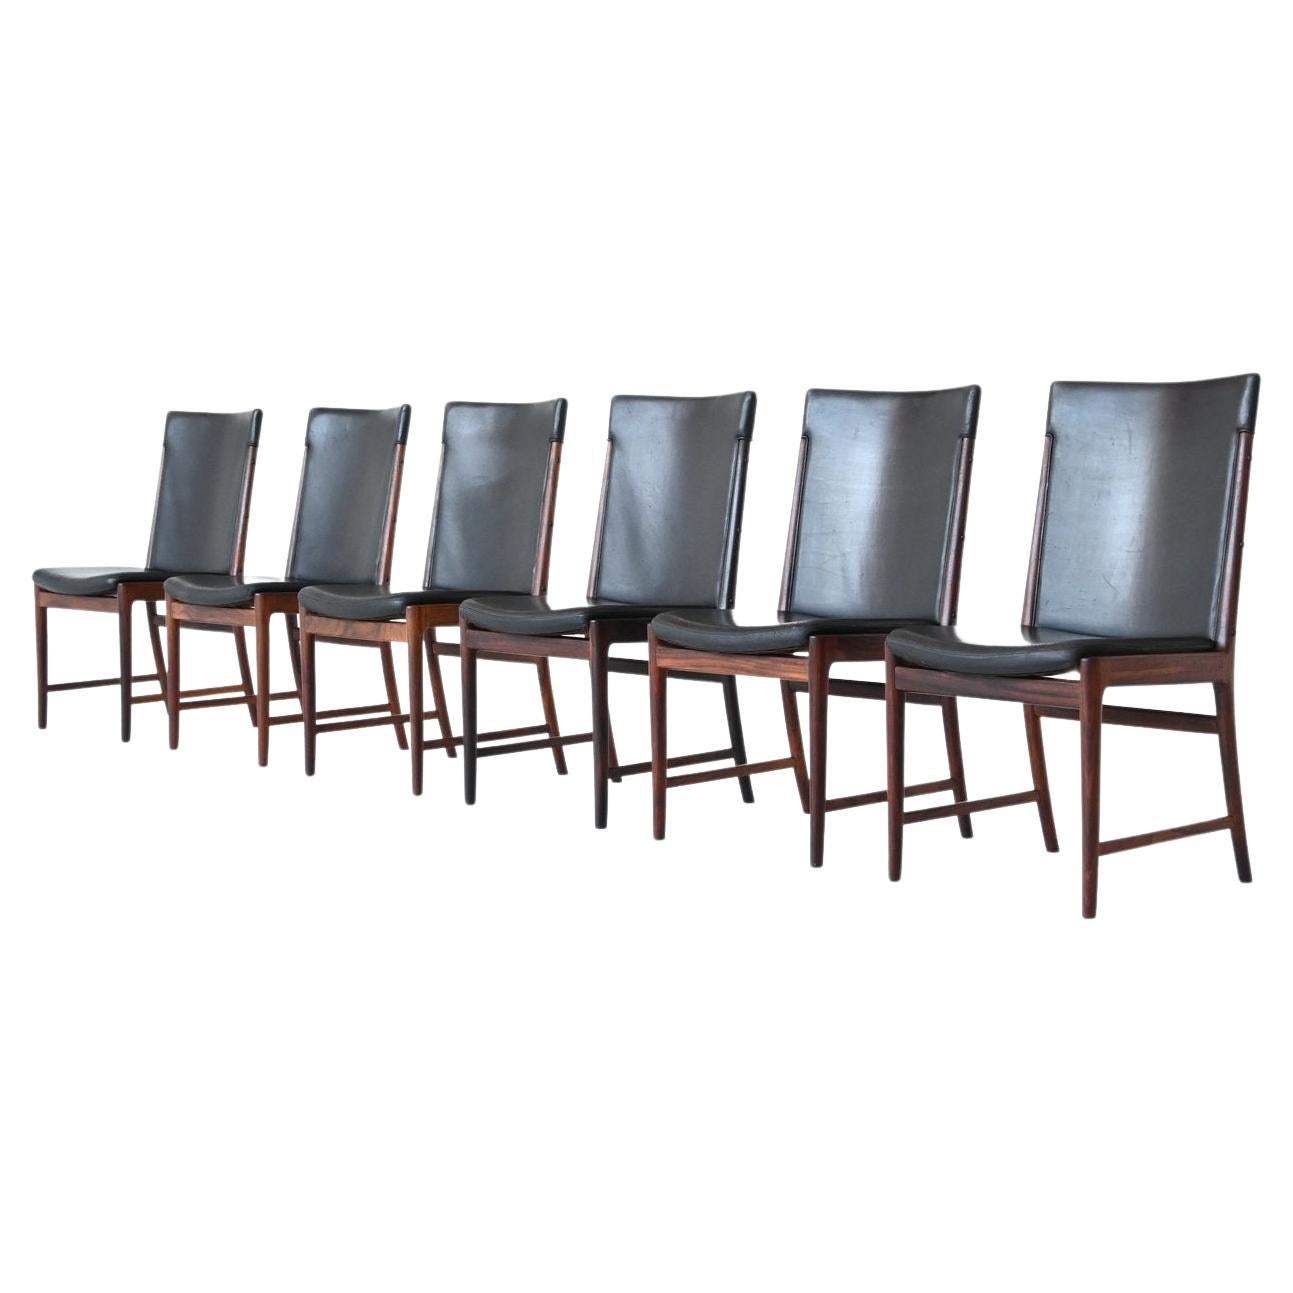 Stunning set of six beautiful shaped and well-crafted dining chairs designed by Kai Lyngfledt Larsen and manufactured by Søren Willadsen, Denmark 1960. These chairs are made of nicely grained solid Brazilian rosewood and the seats are upholstered